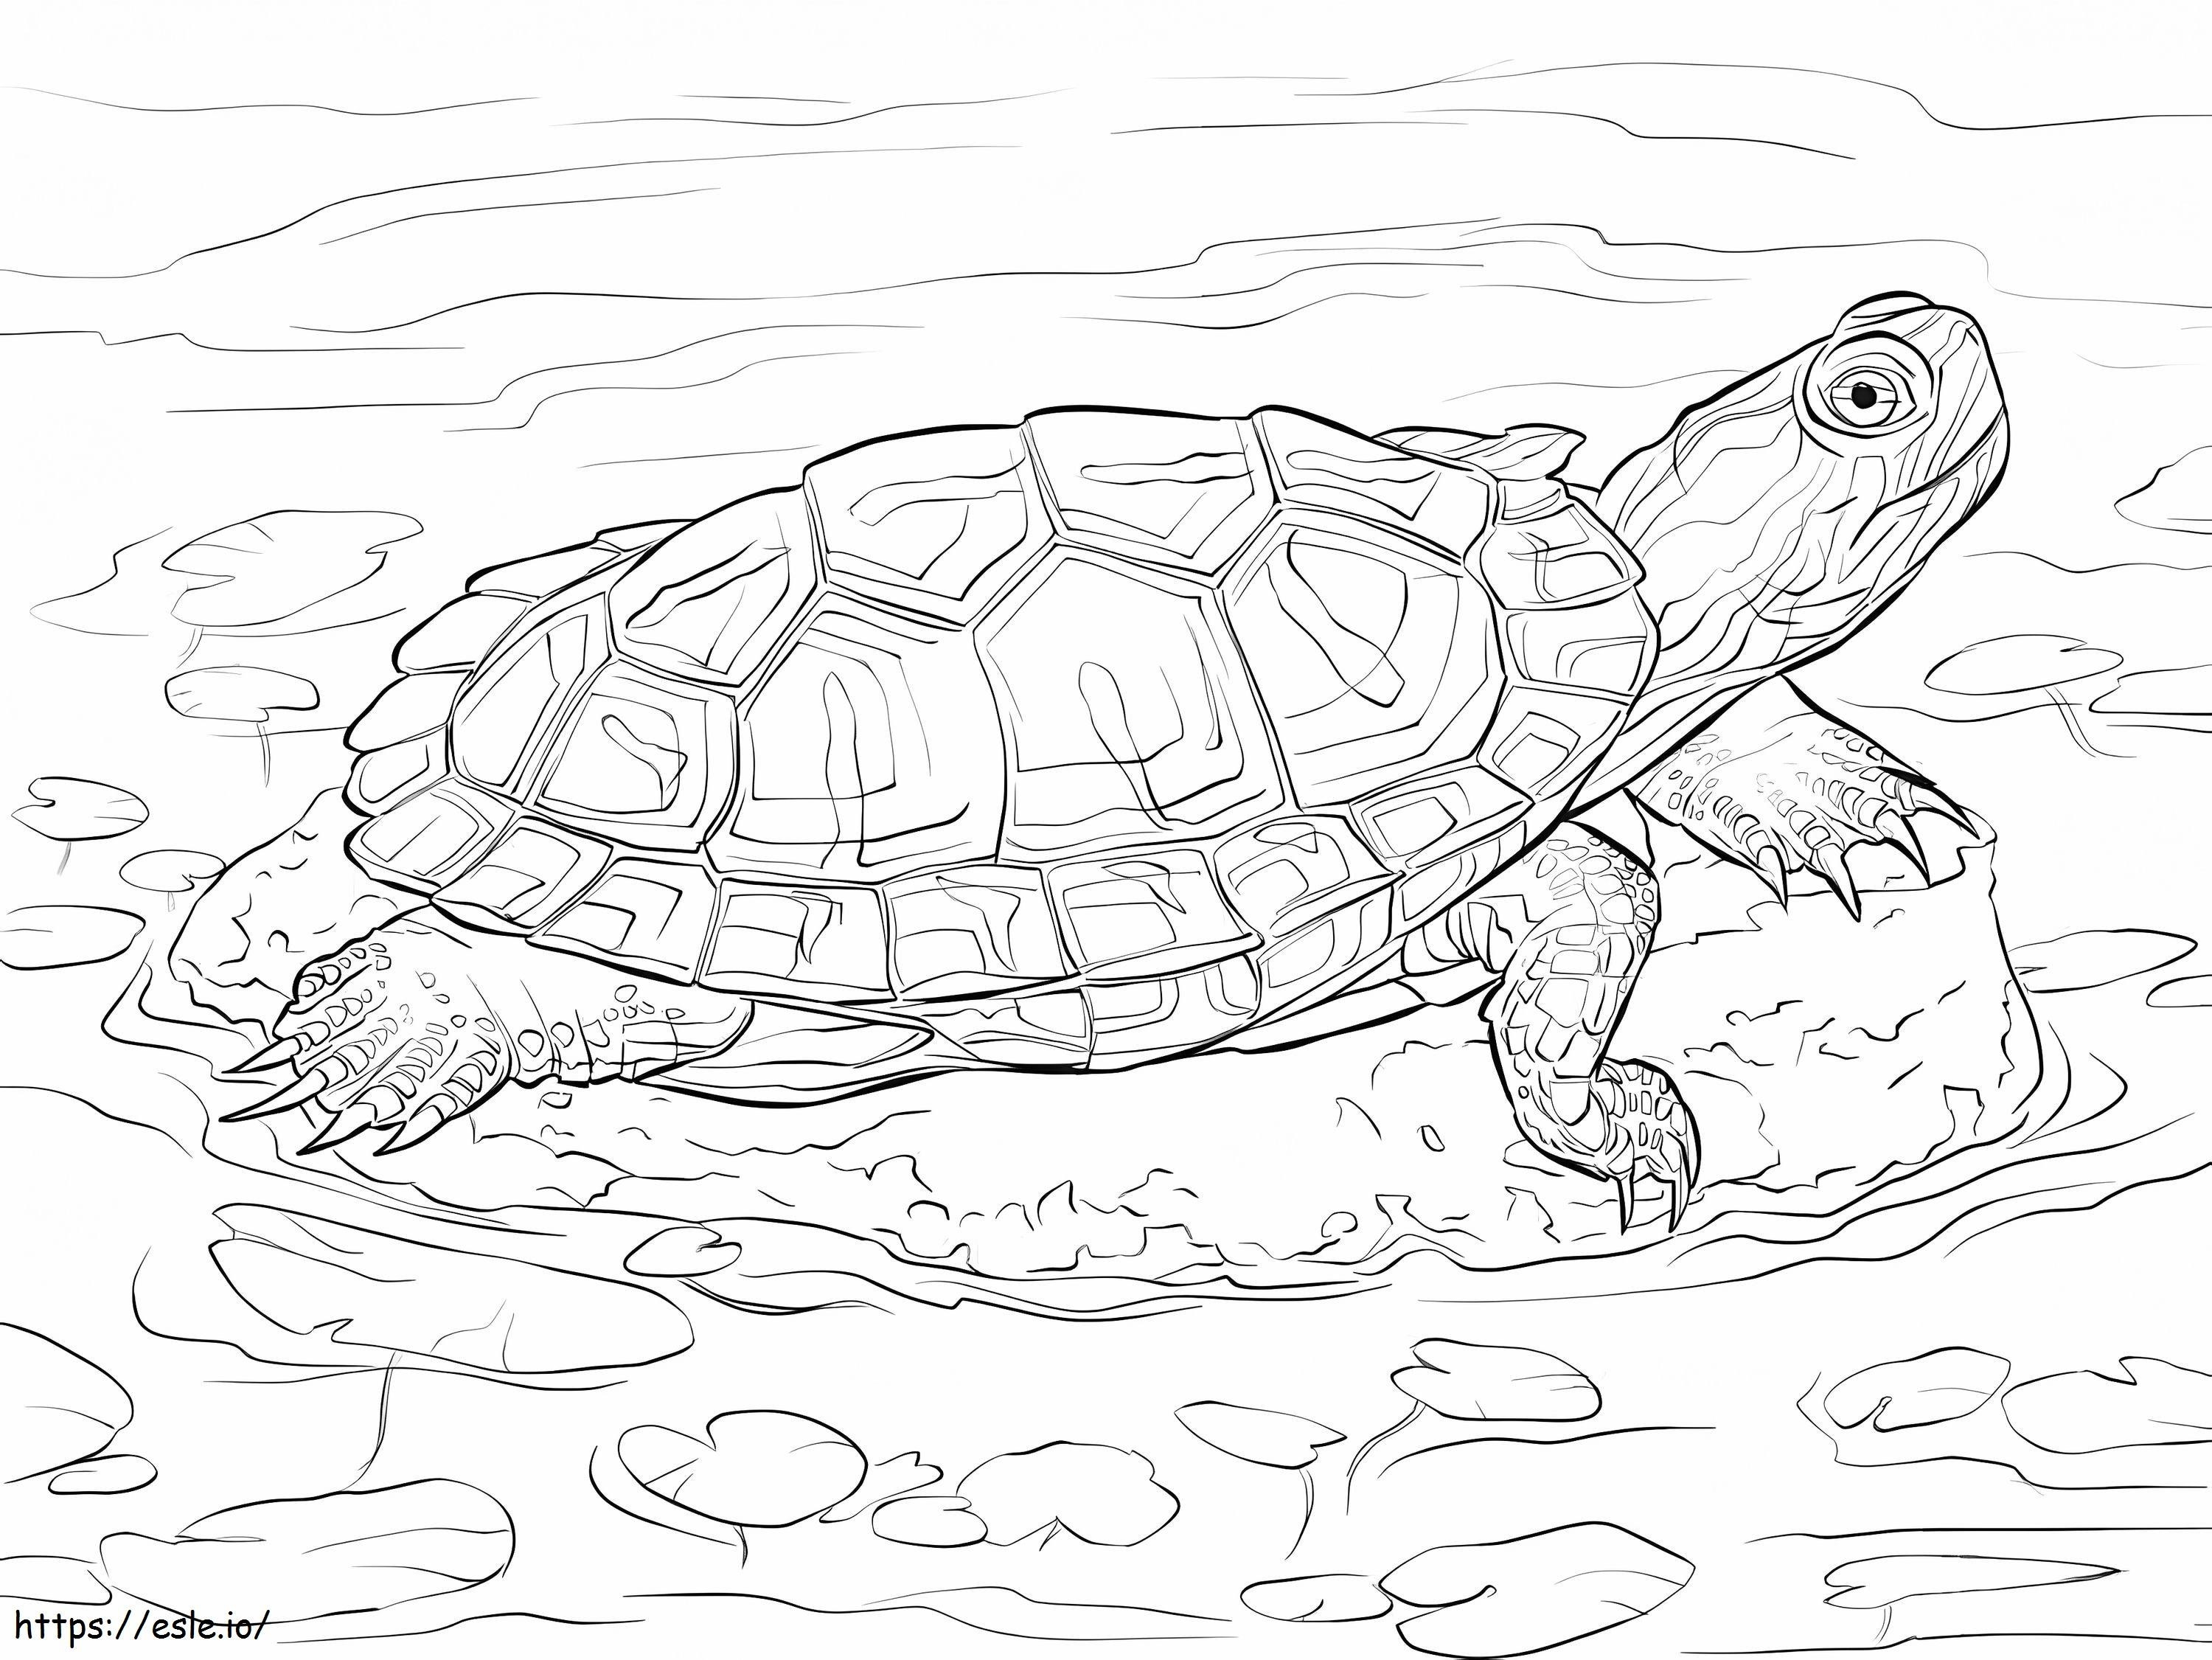 Red Ears Slider coloring page